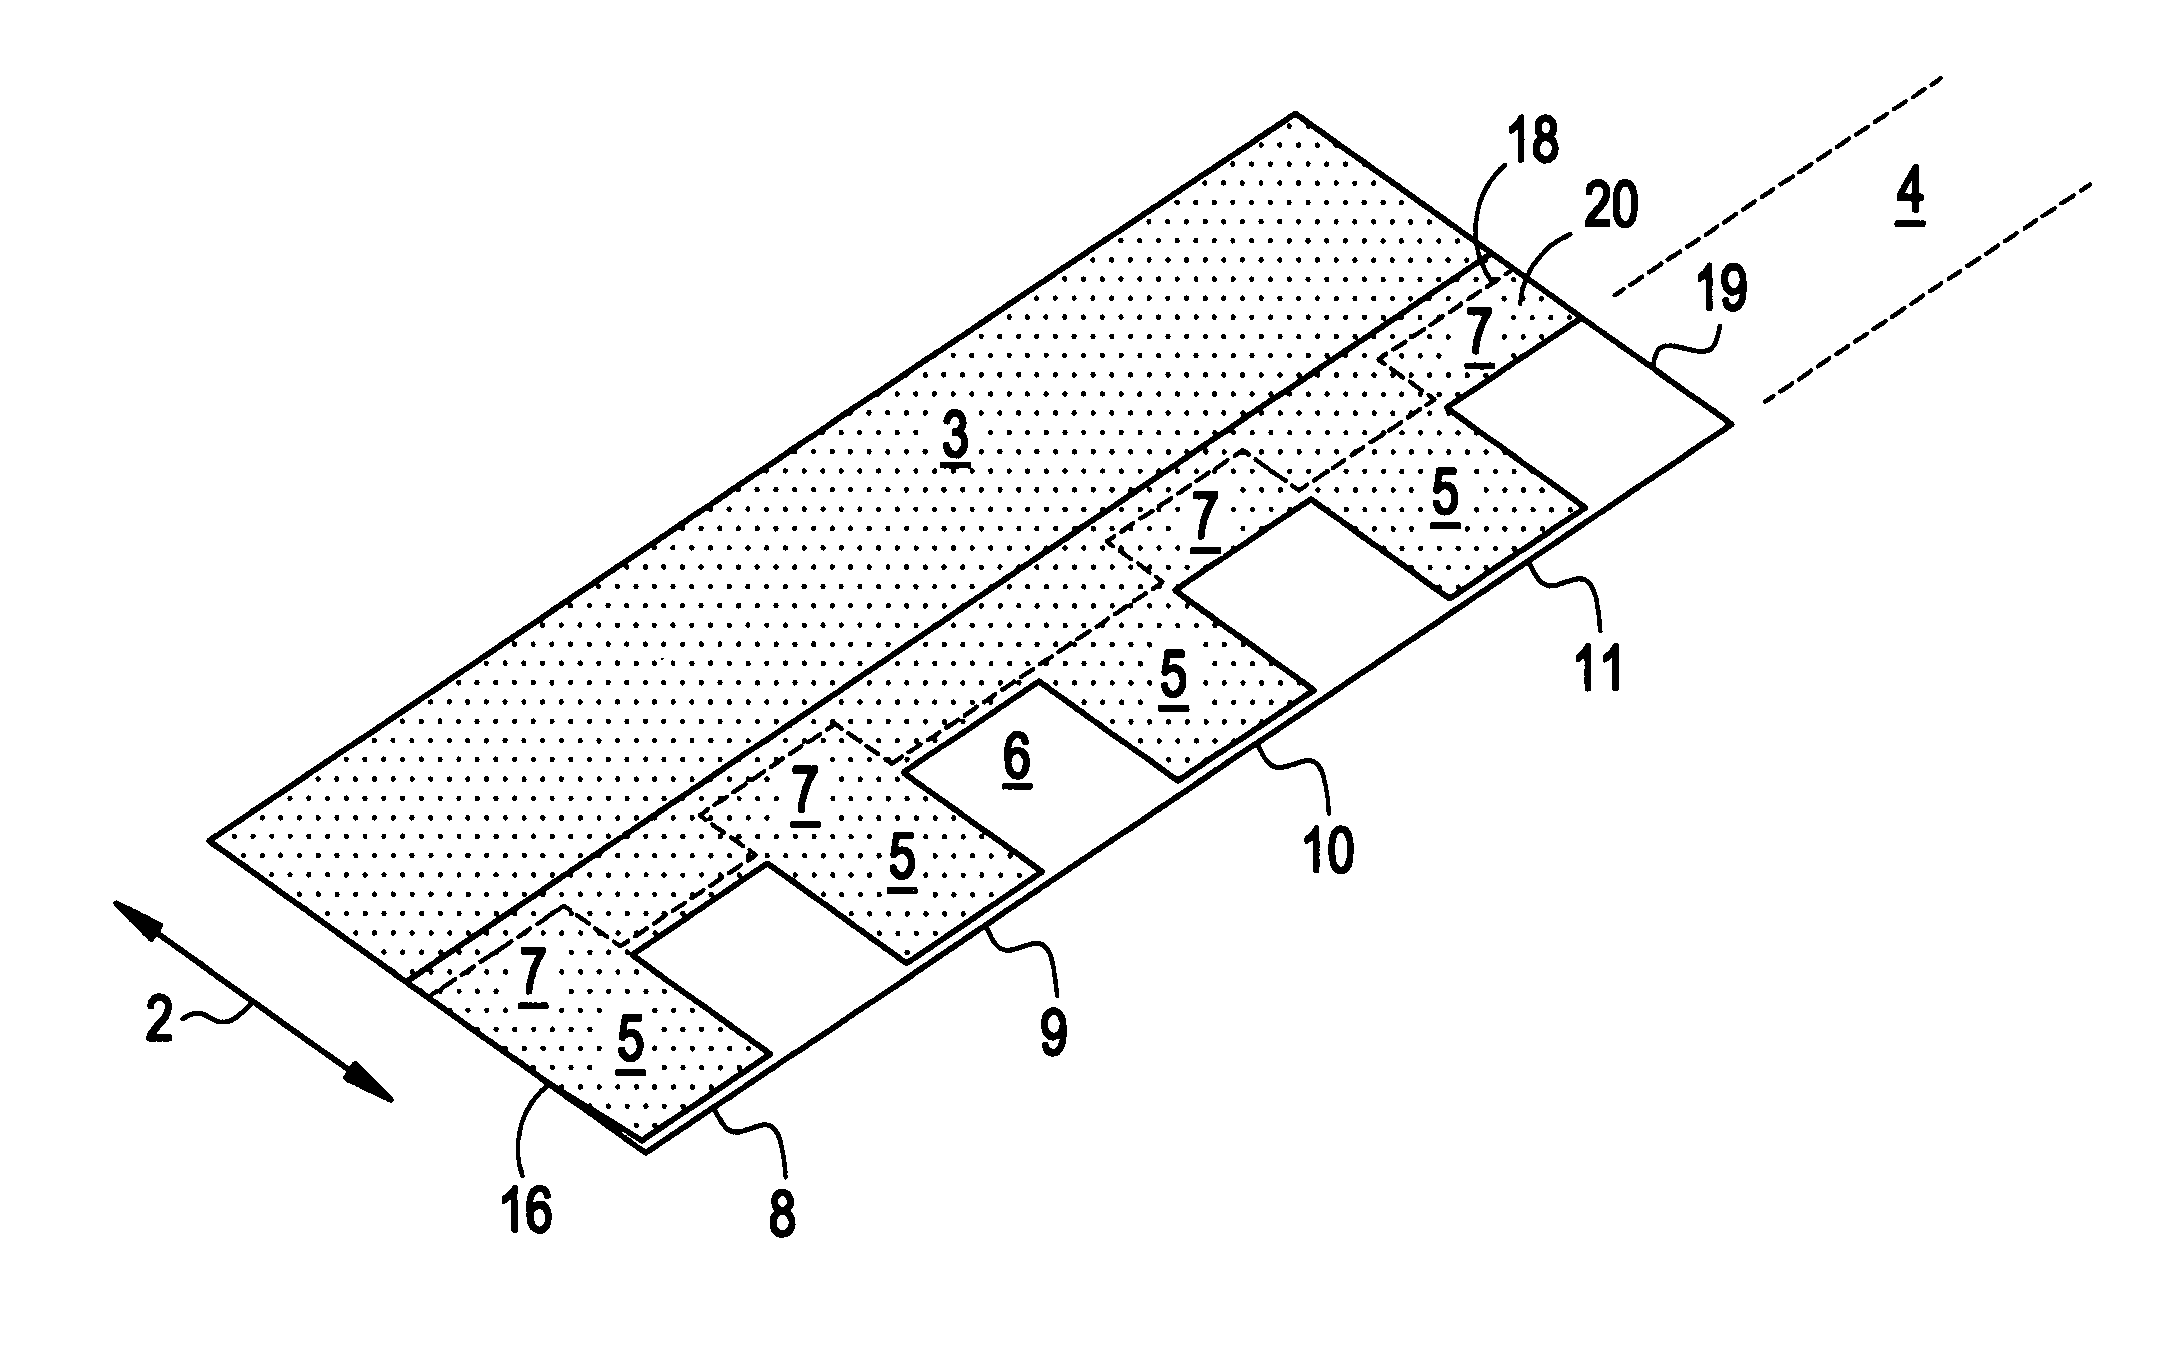 Packaging of tabbed composite shingles having a backer strip containing uniform, identically spaced, vertical projections on its top edge